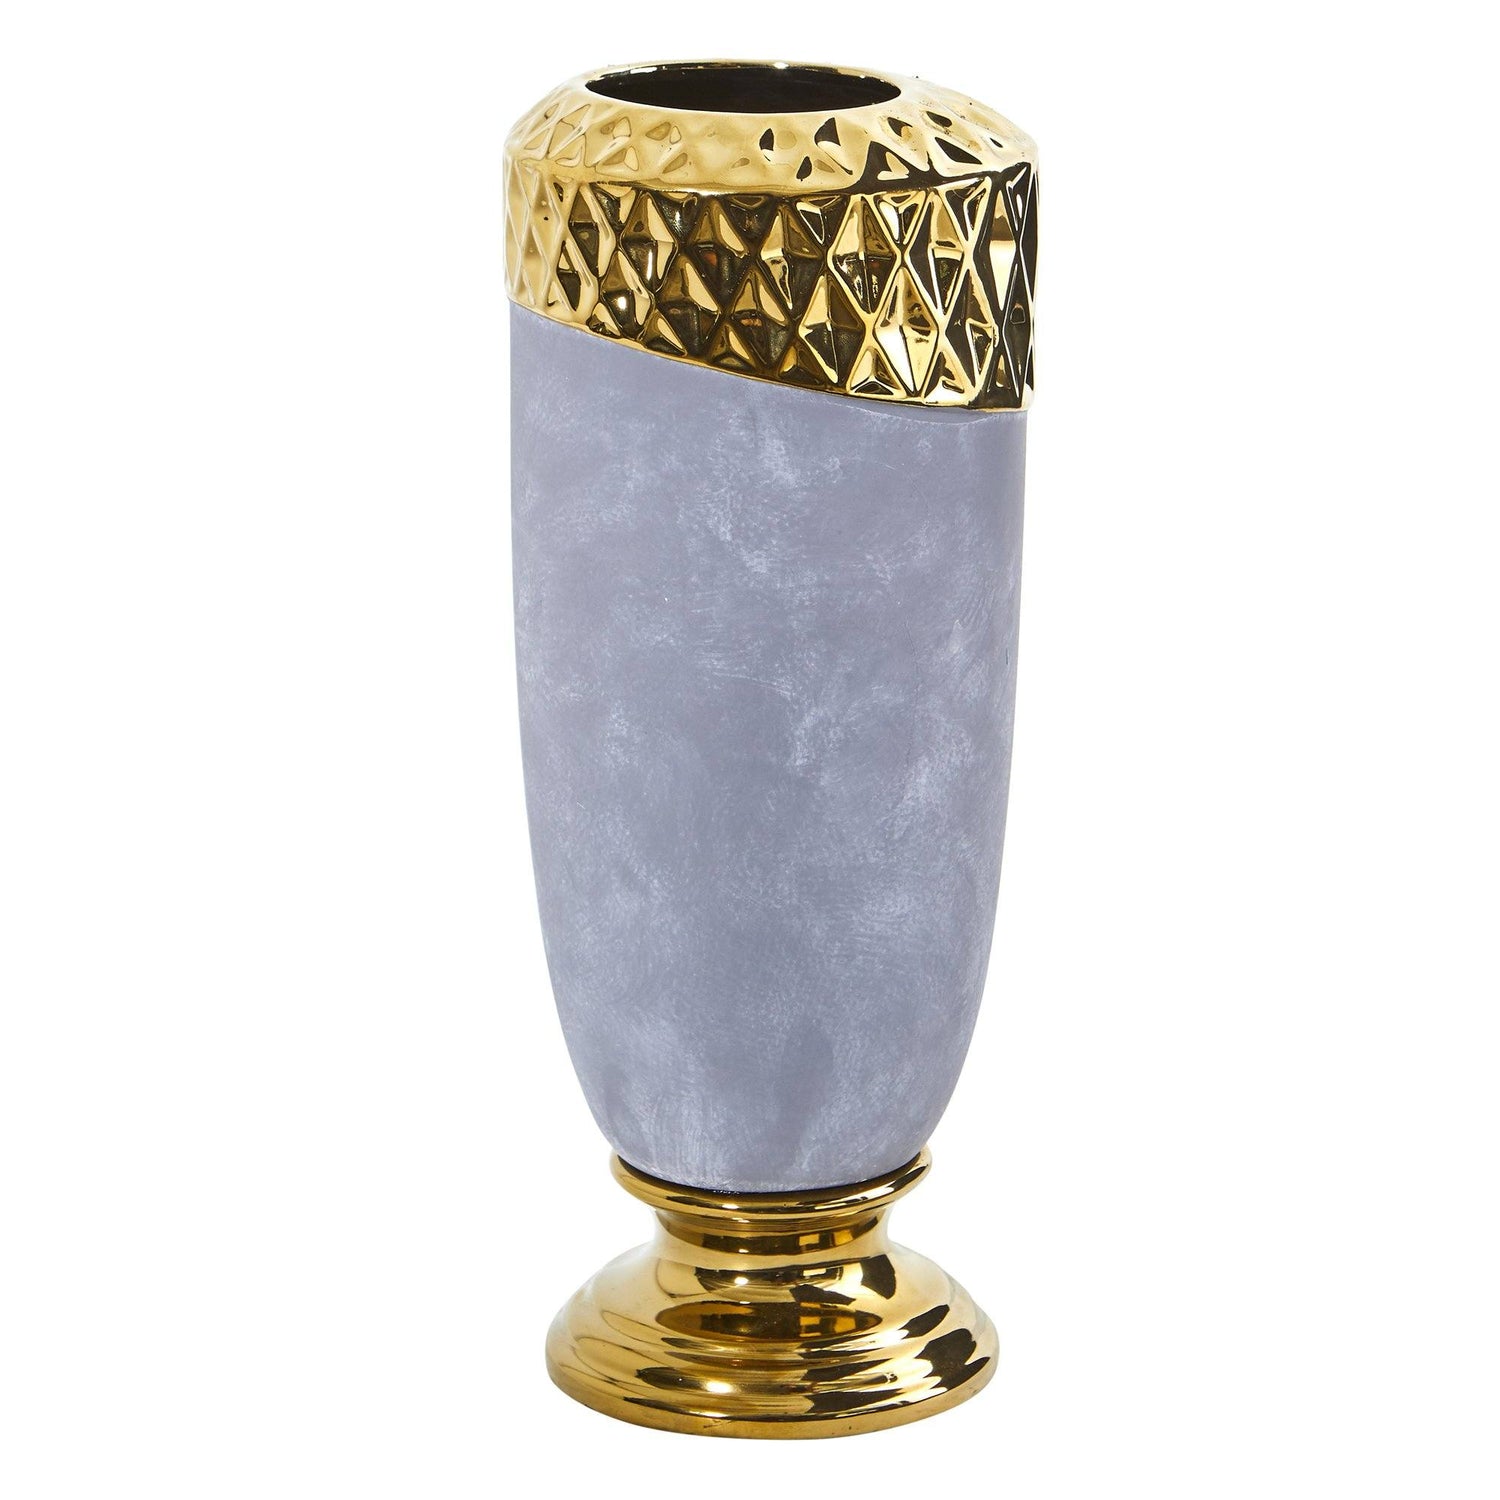 11.5” Regal Stone Vase with Gold Accents